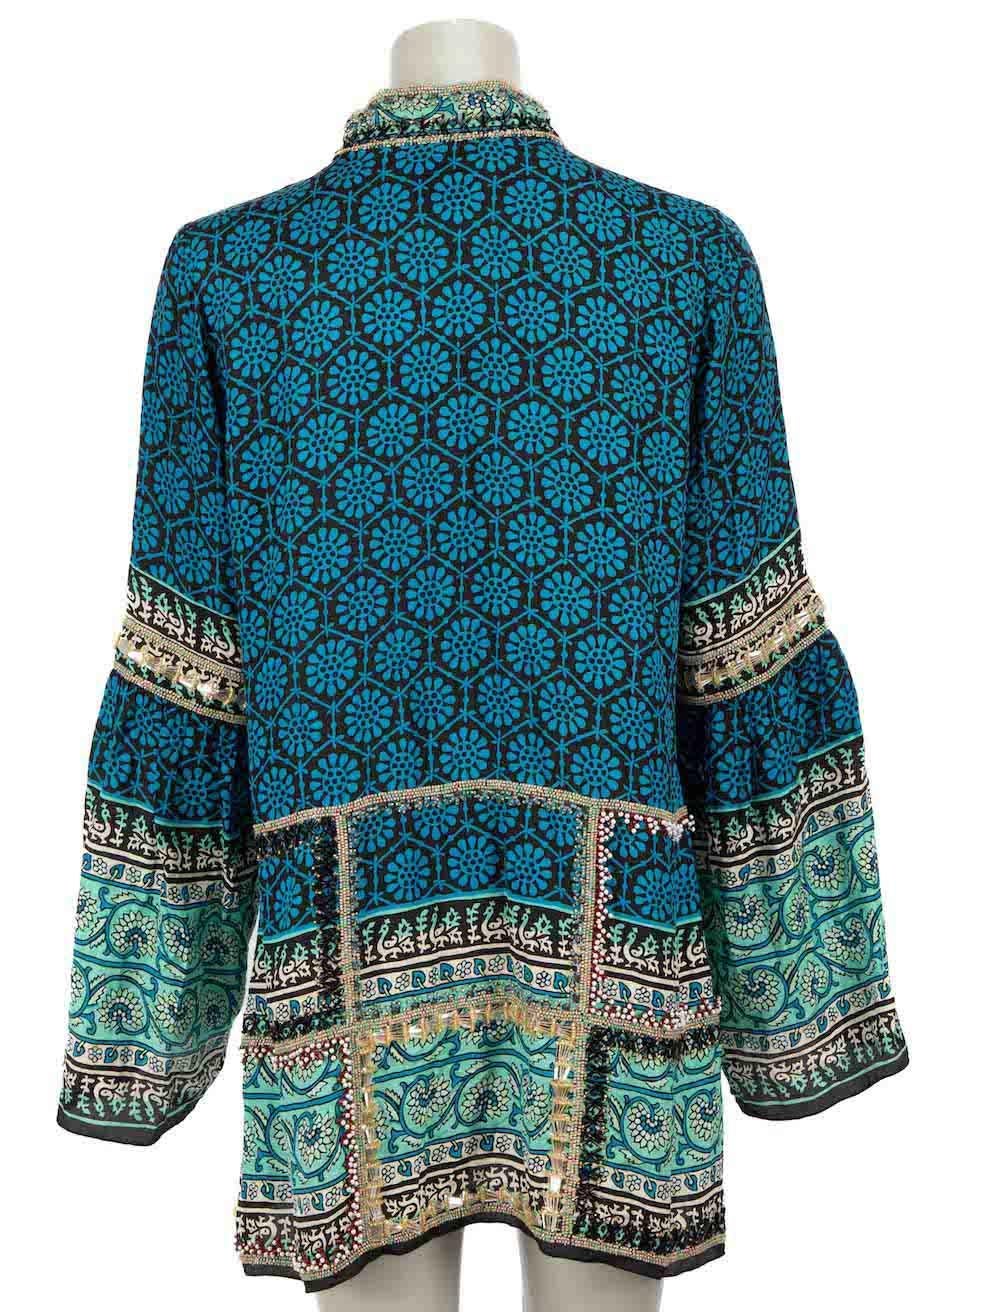 Anna Sui Bead Embellished Pattern Tunic Top Size XL In Excellent Condition For Sale In London, GB